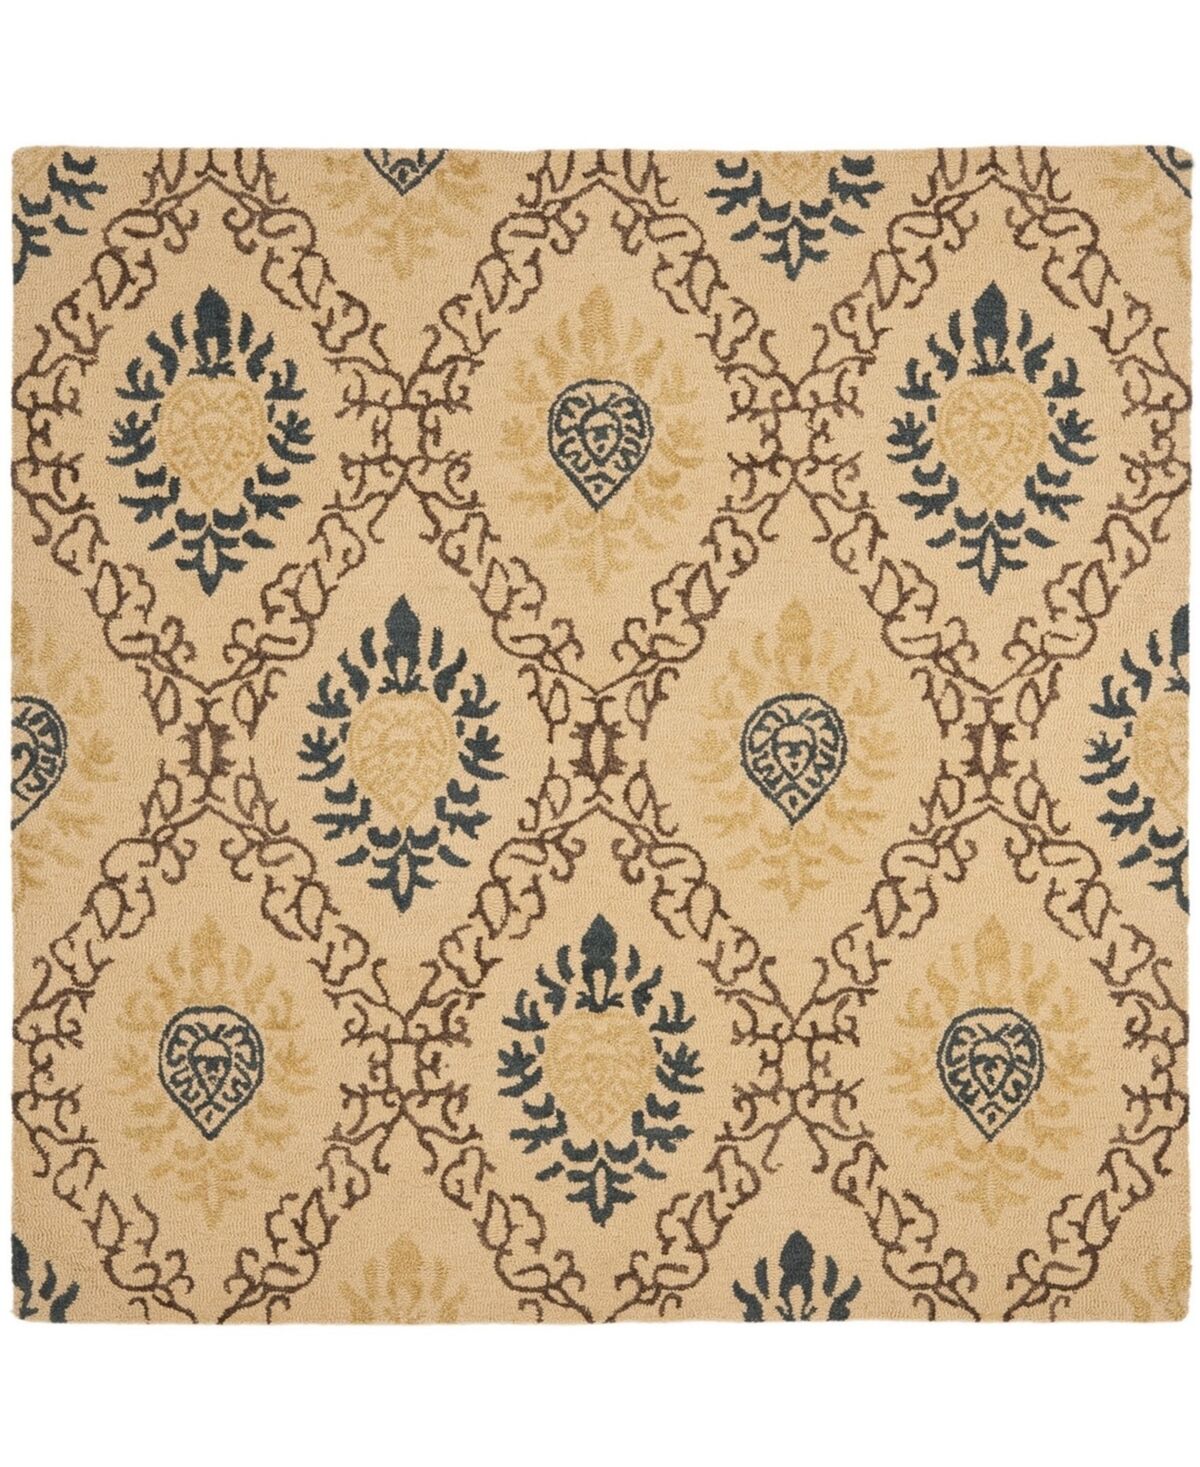 Safavieh Antiquity At460 Gold and Multi 6' x 6' Square Area Rug - Gold